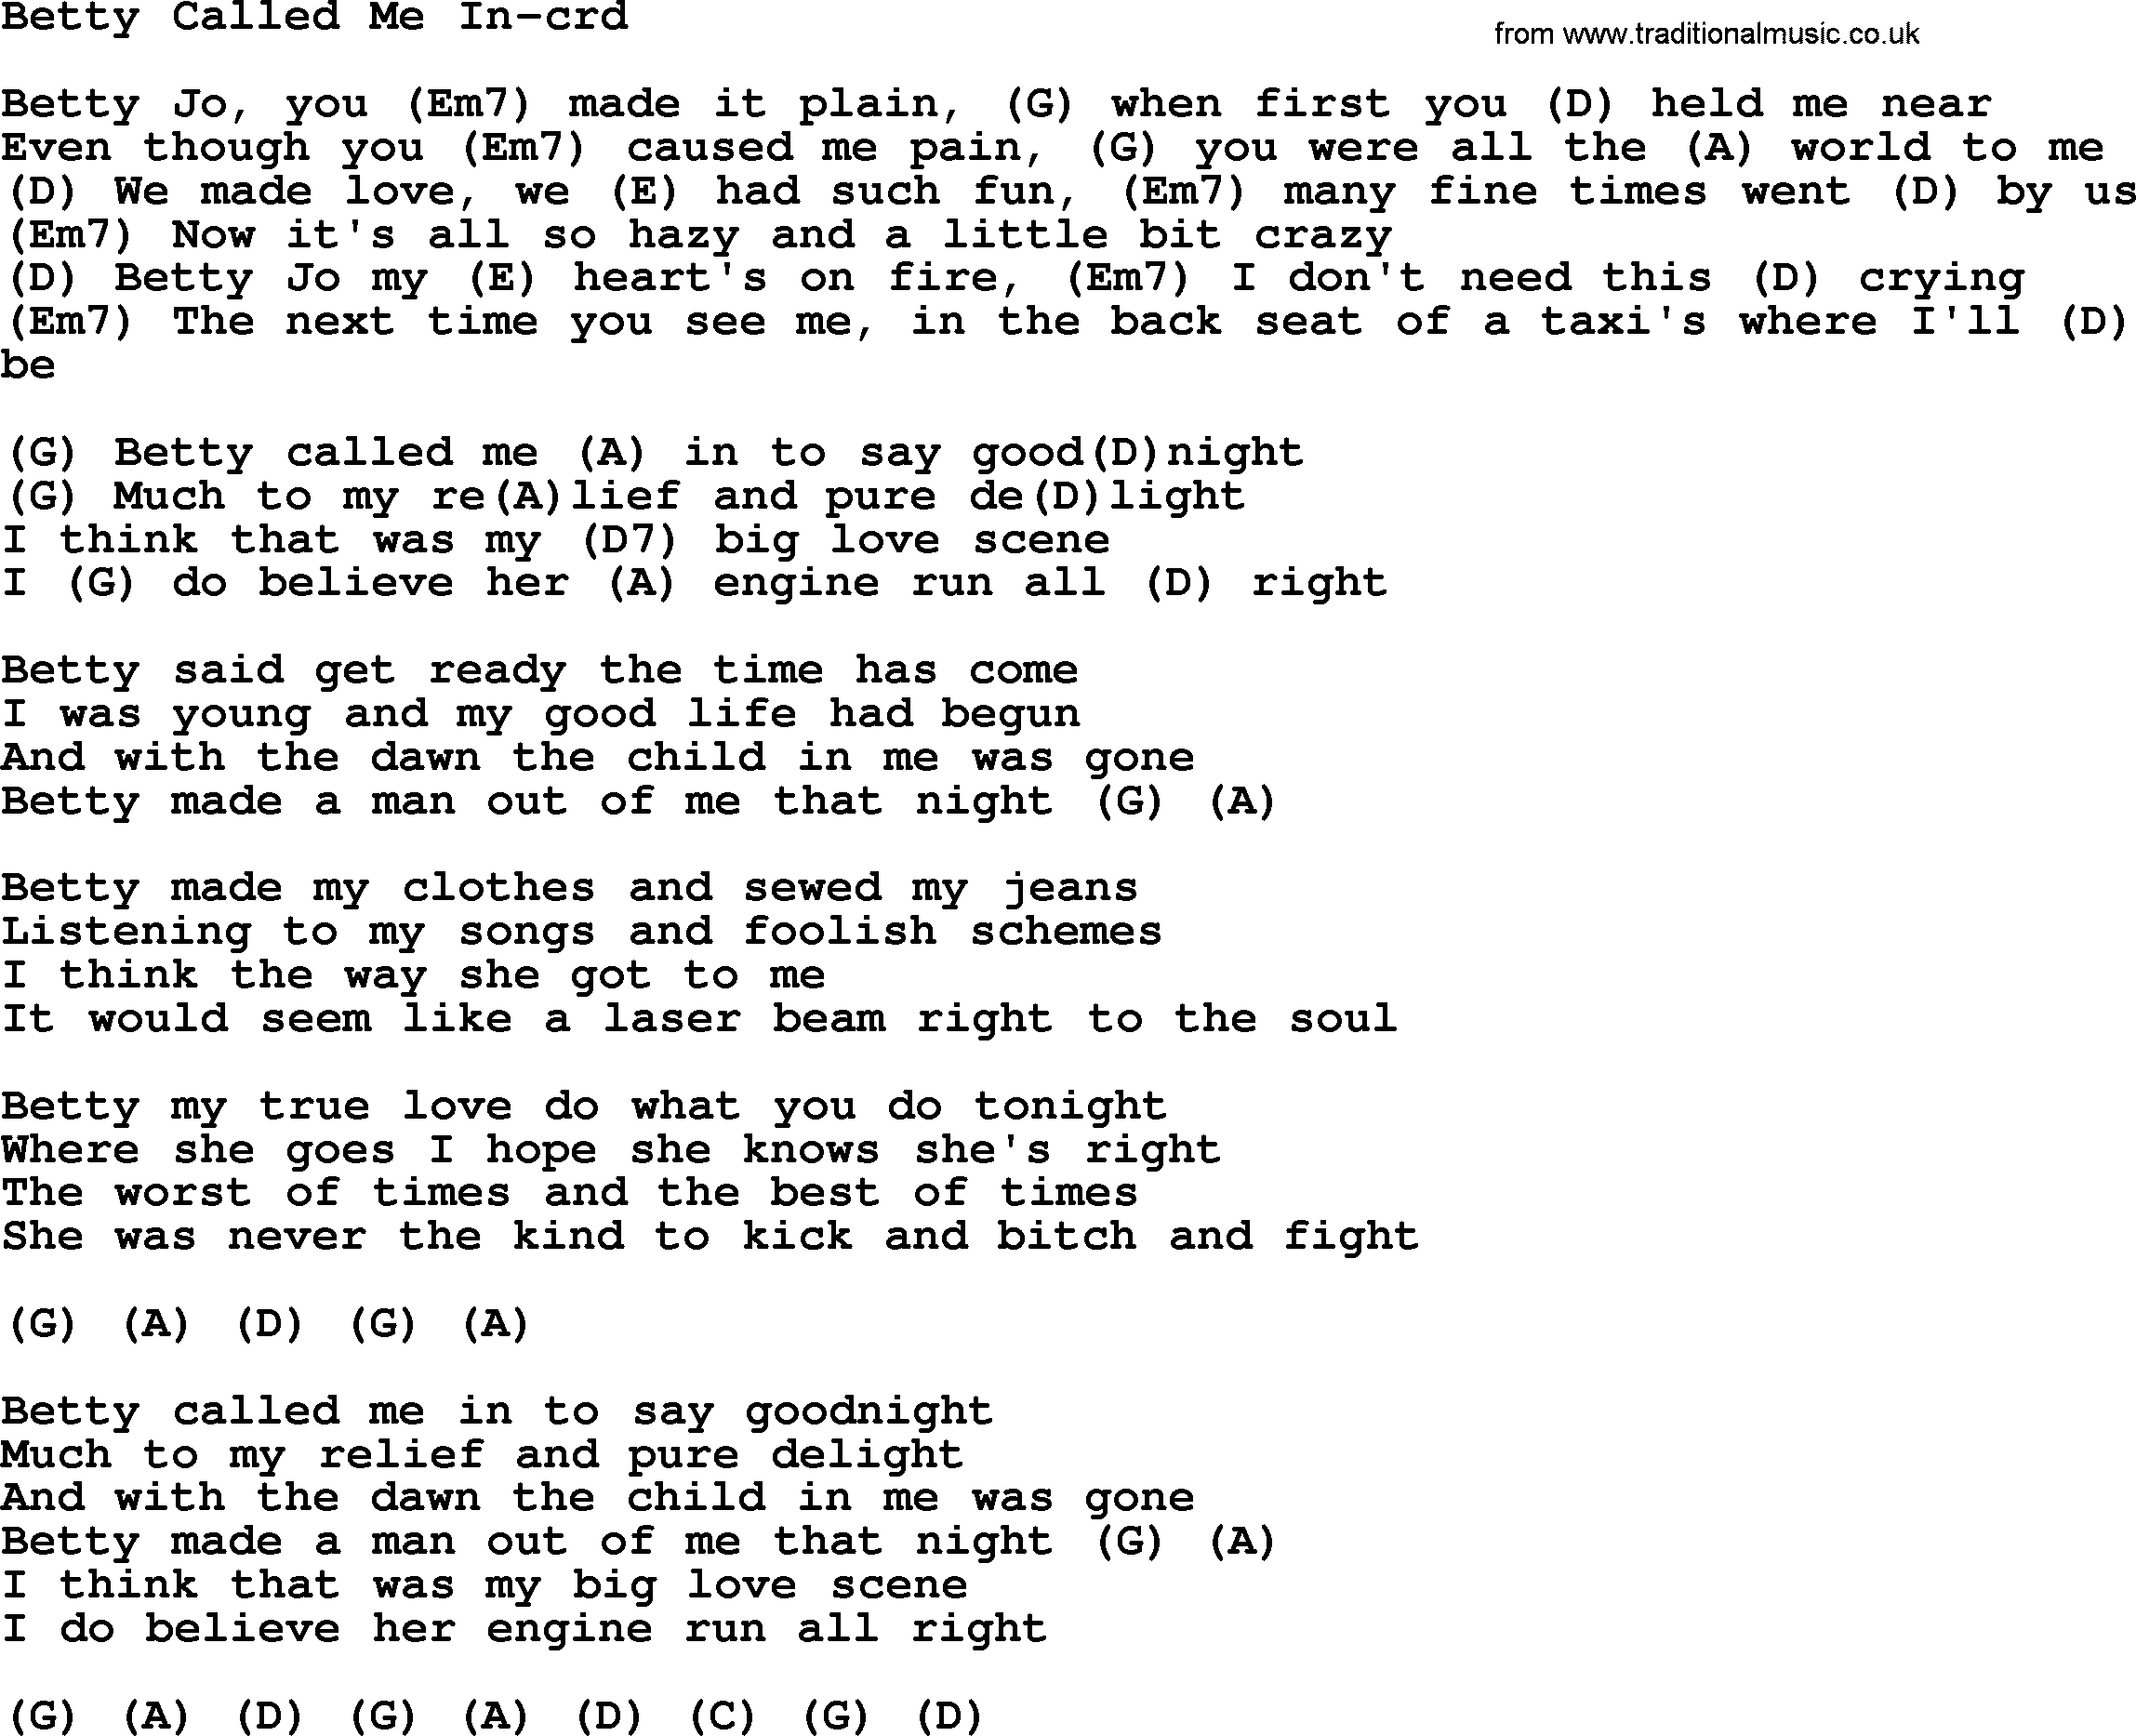 Gordon Lightfoot song Betty Called Me In, lyrics and chords